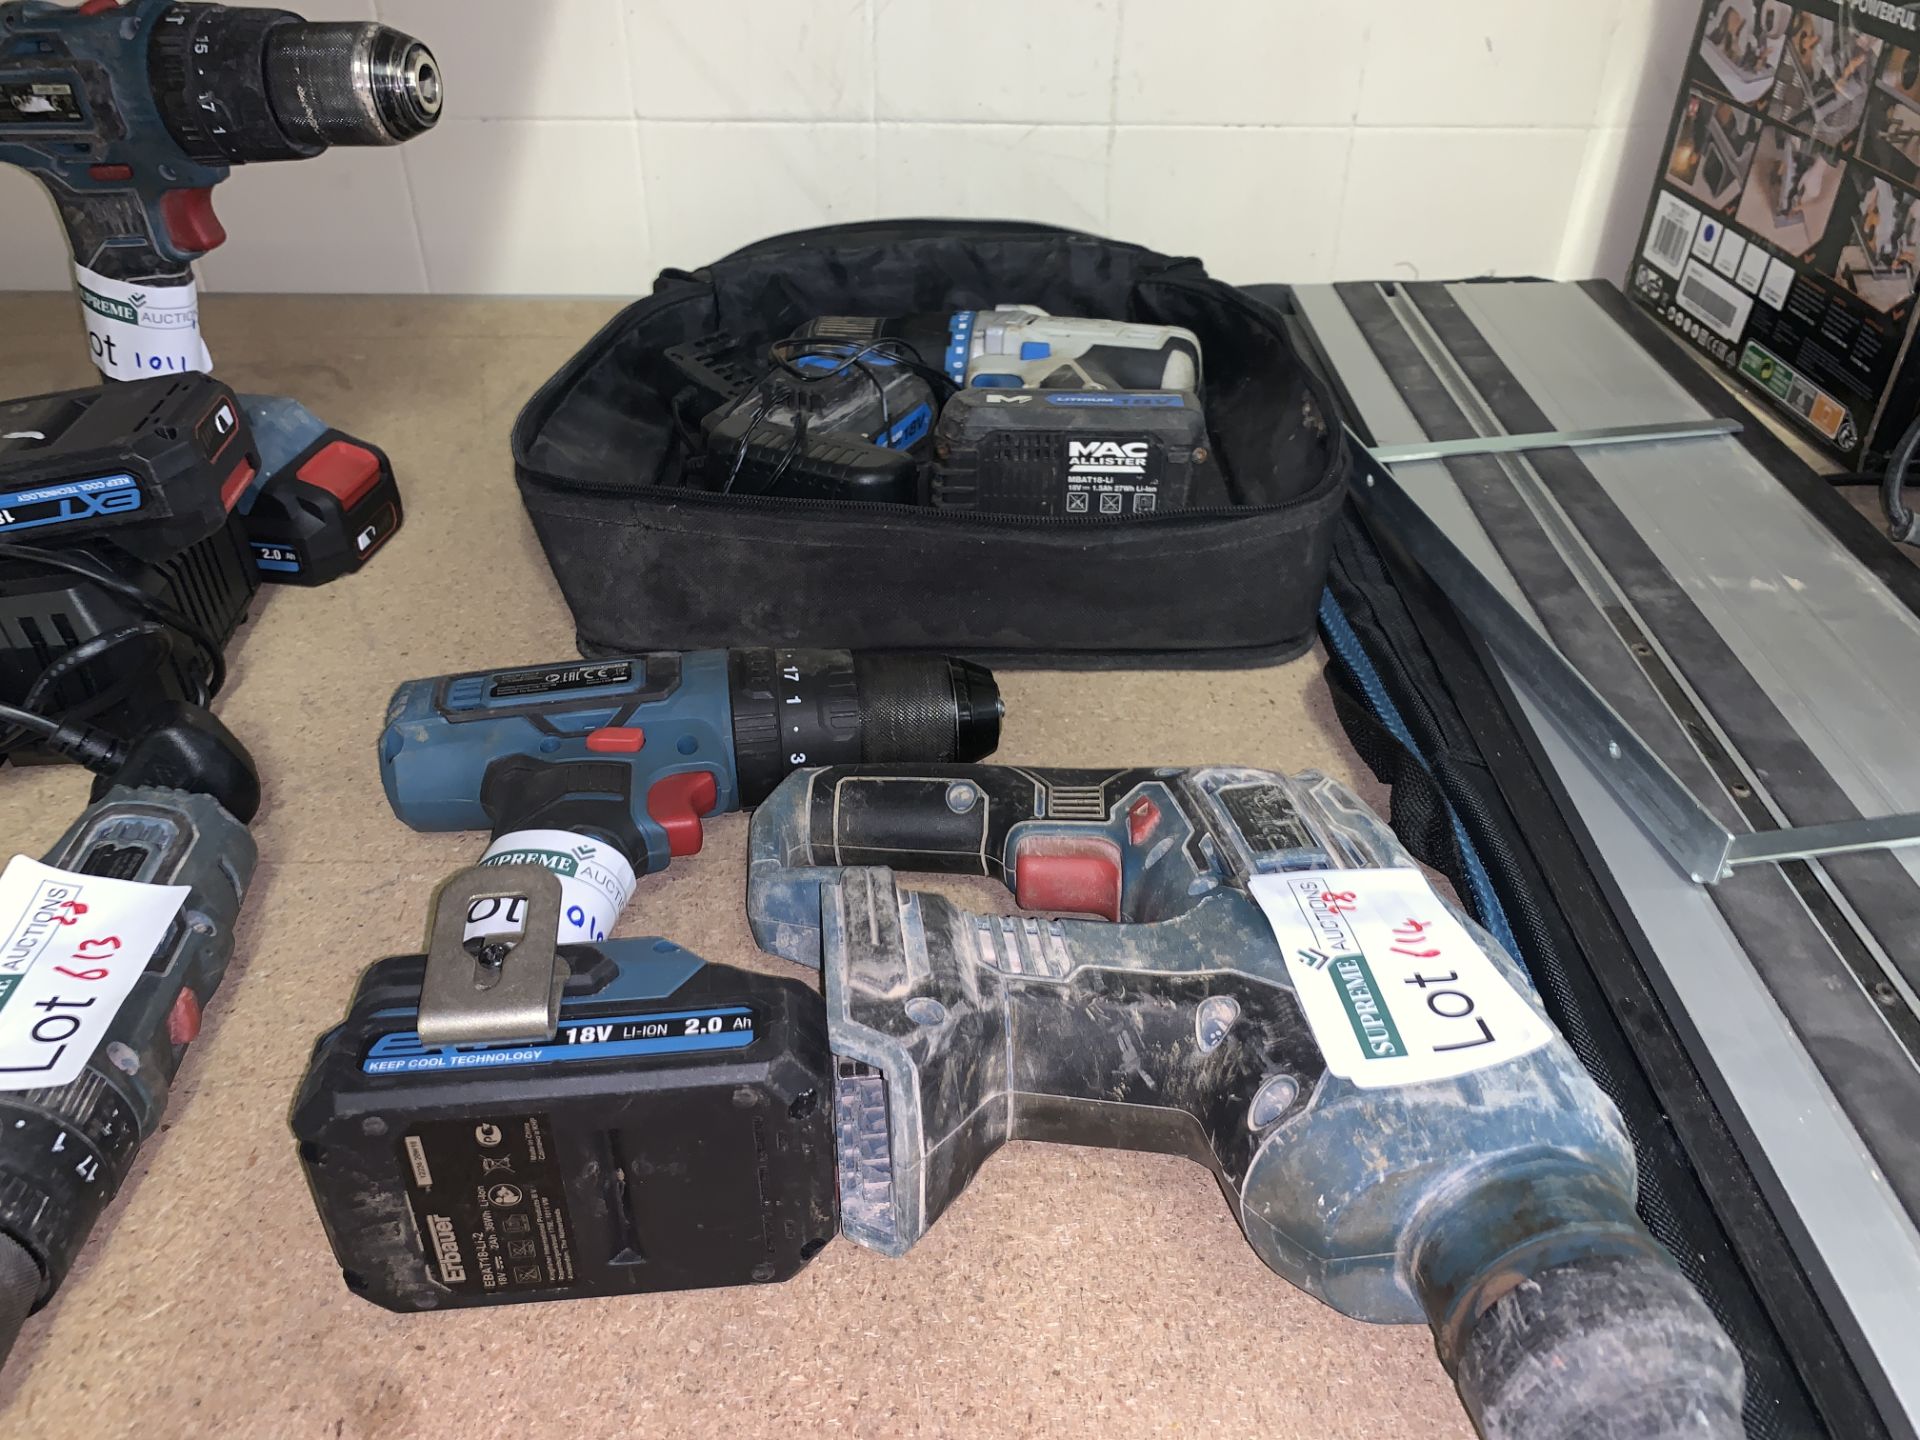 TOOL LOT INCLUDING ERBAUER COMBI DRILL, ERBAUER SDS DRILL AND MAC ALLISTER COMBI DRILL COMES WITH